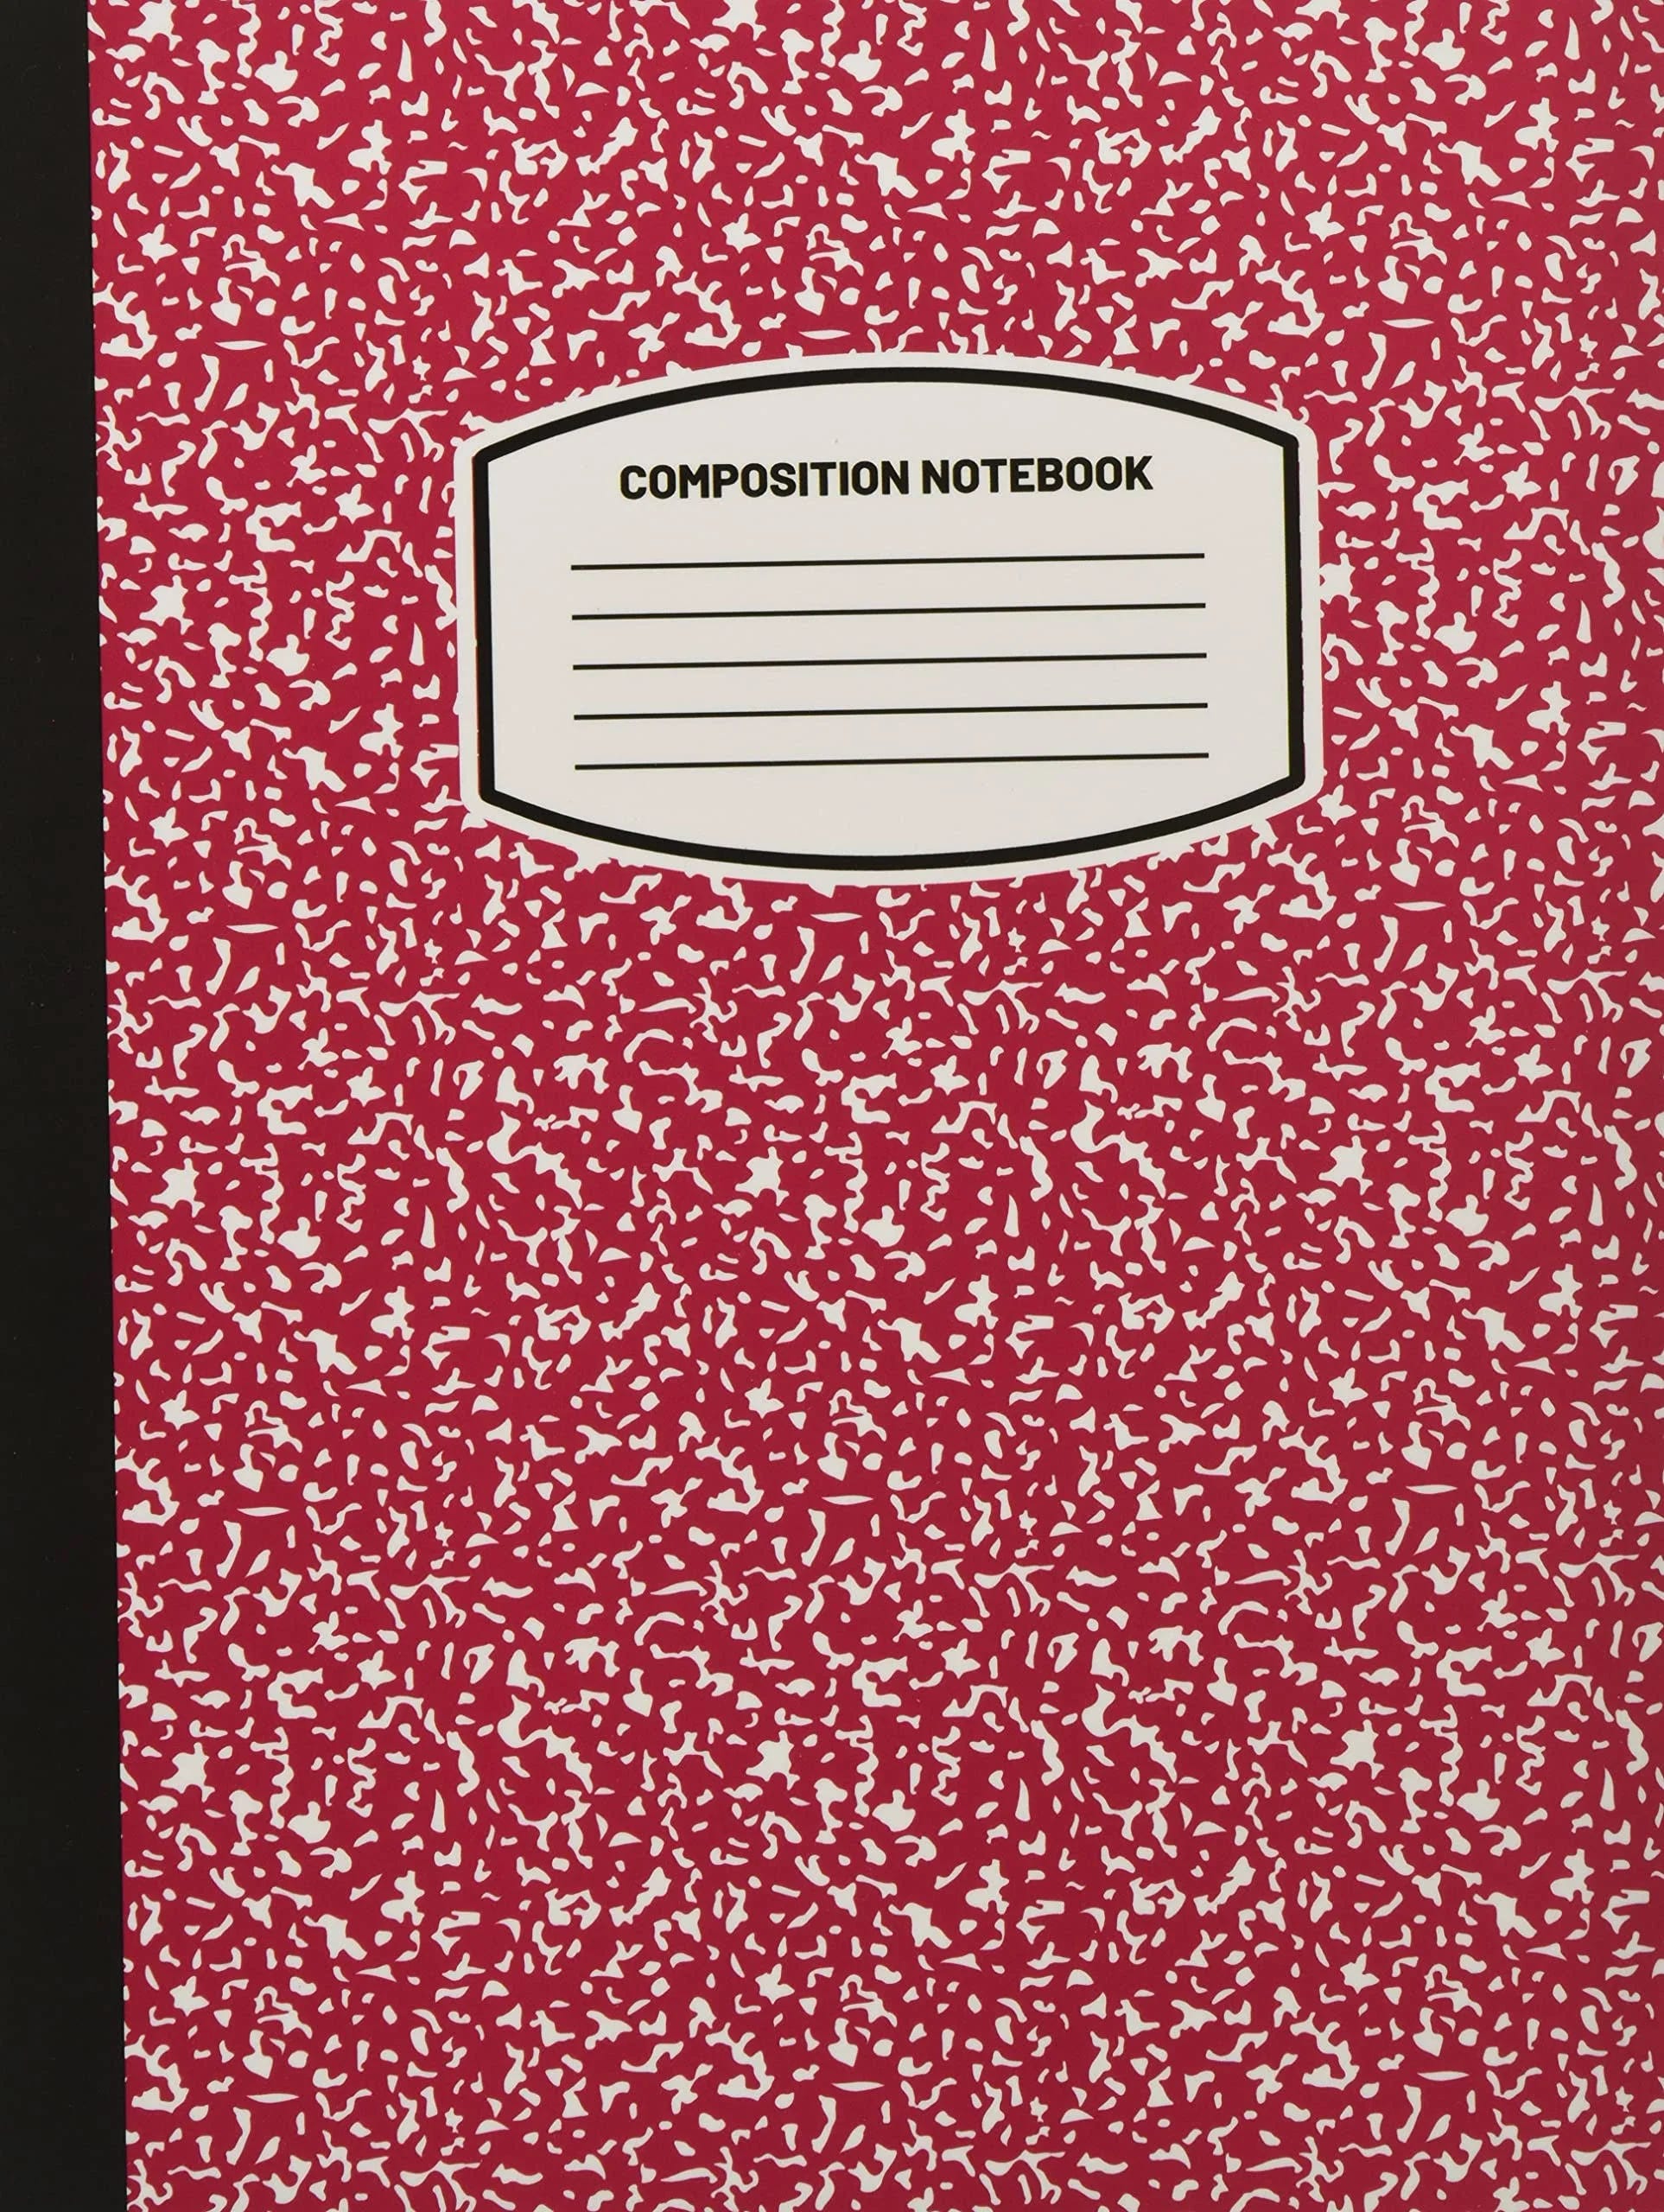 Classic Composition Notebook with Lined Paper for School or Work (Magenta) - 100 Pages, Wide Ruled, High Quality Glossy Cover | Image